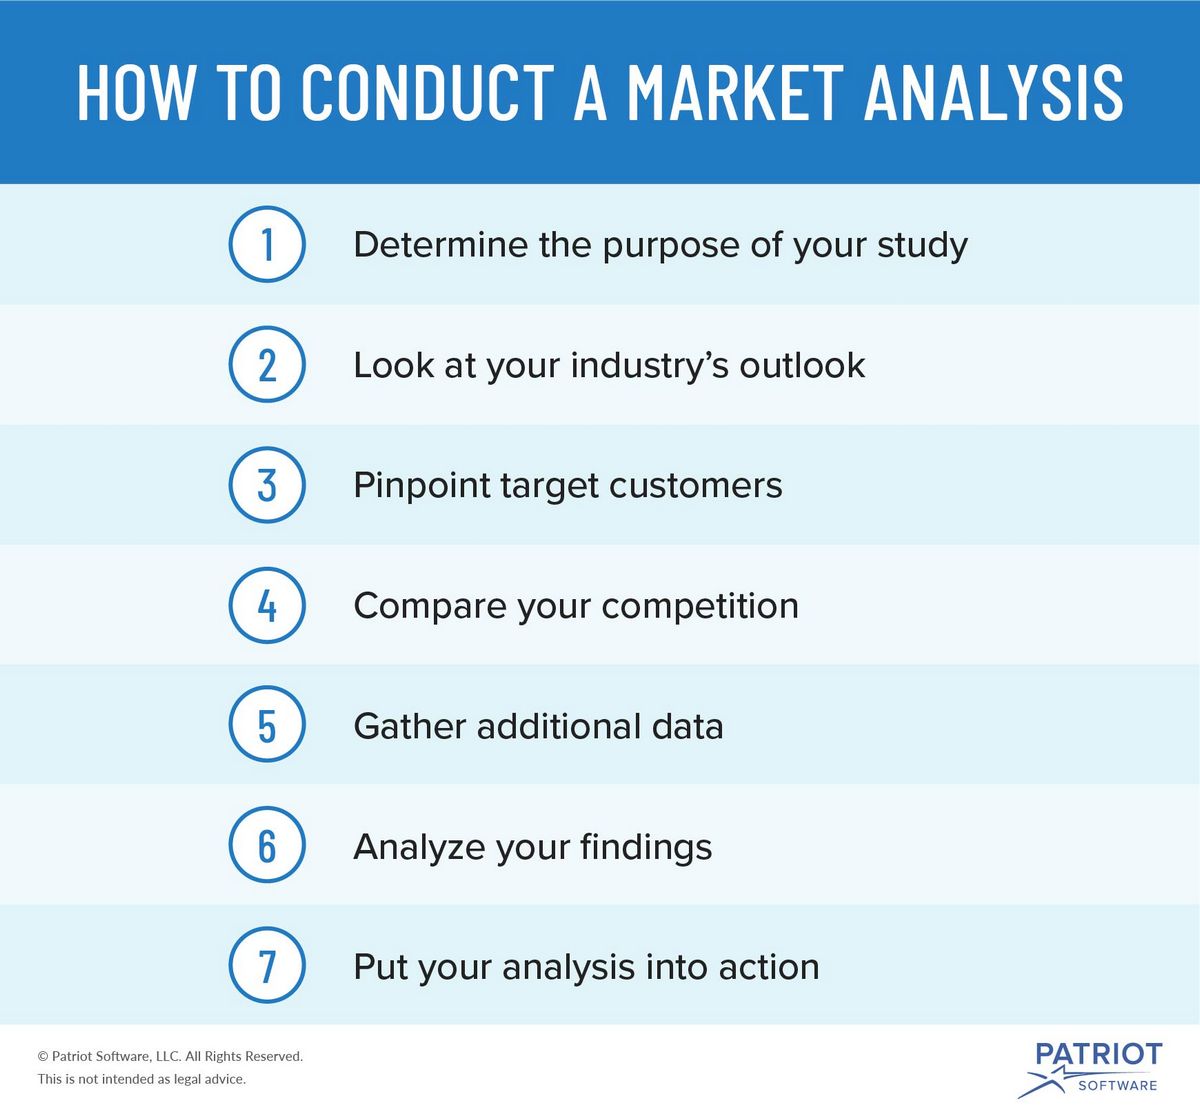 How to Conduct a Market Analysis in a Crisis